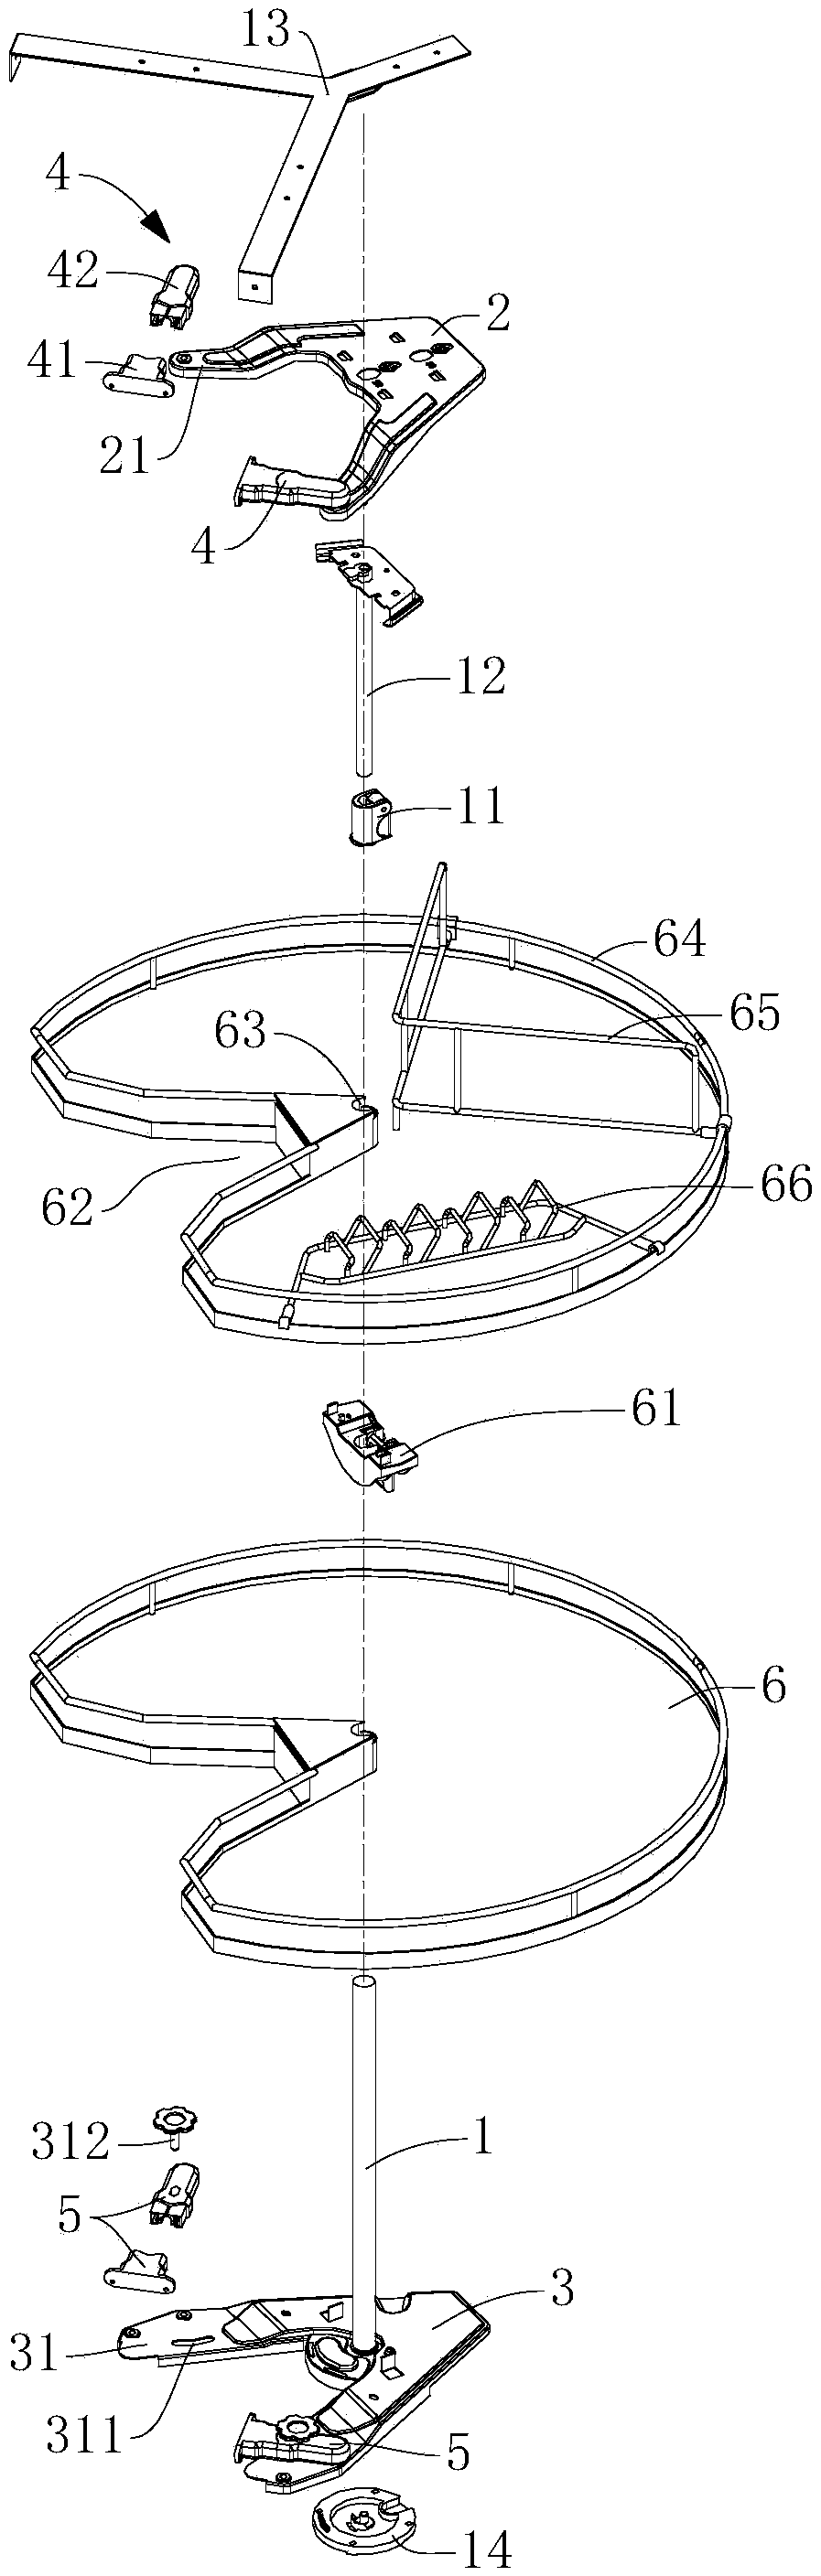 Rotating tray device and cabinet